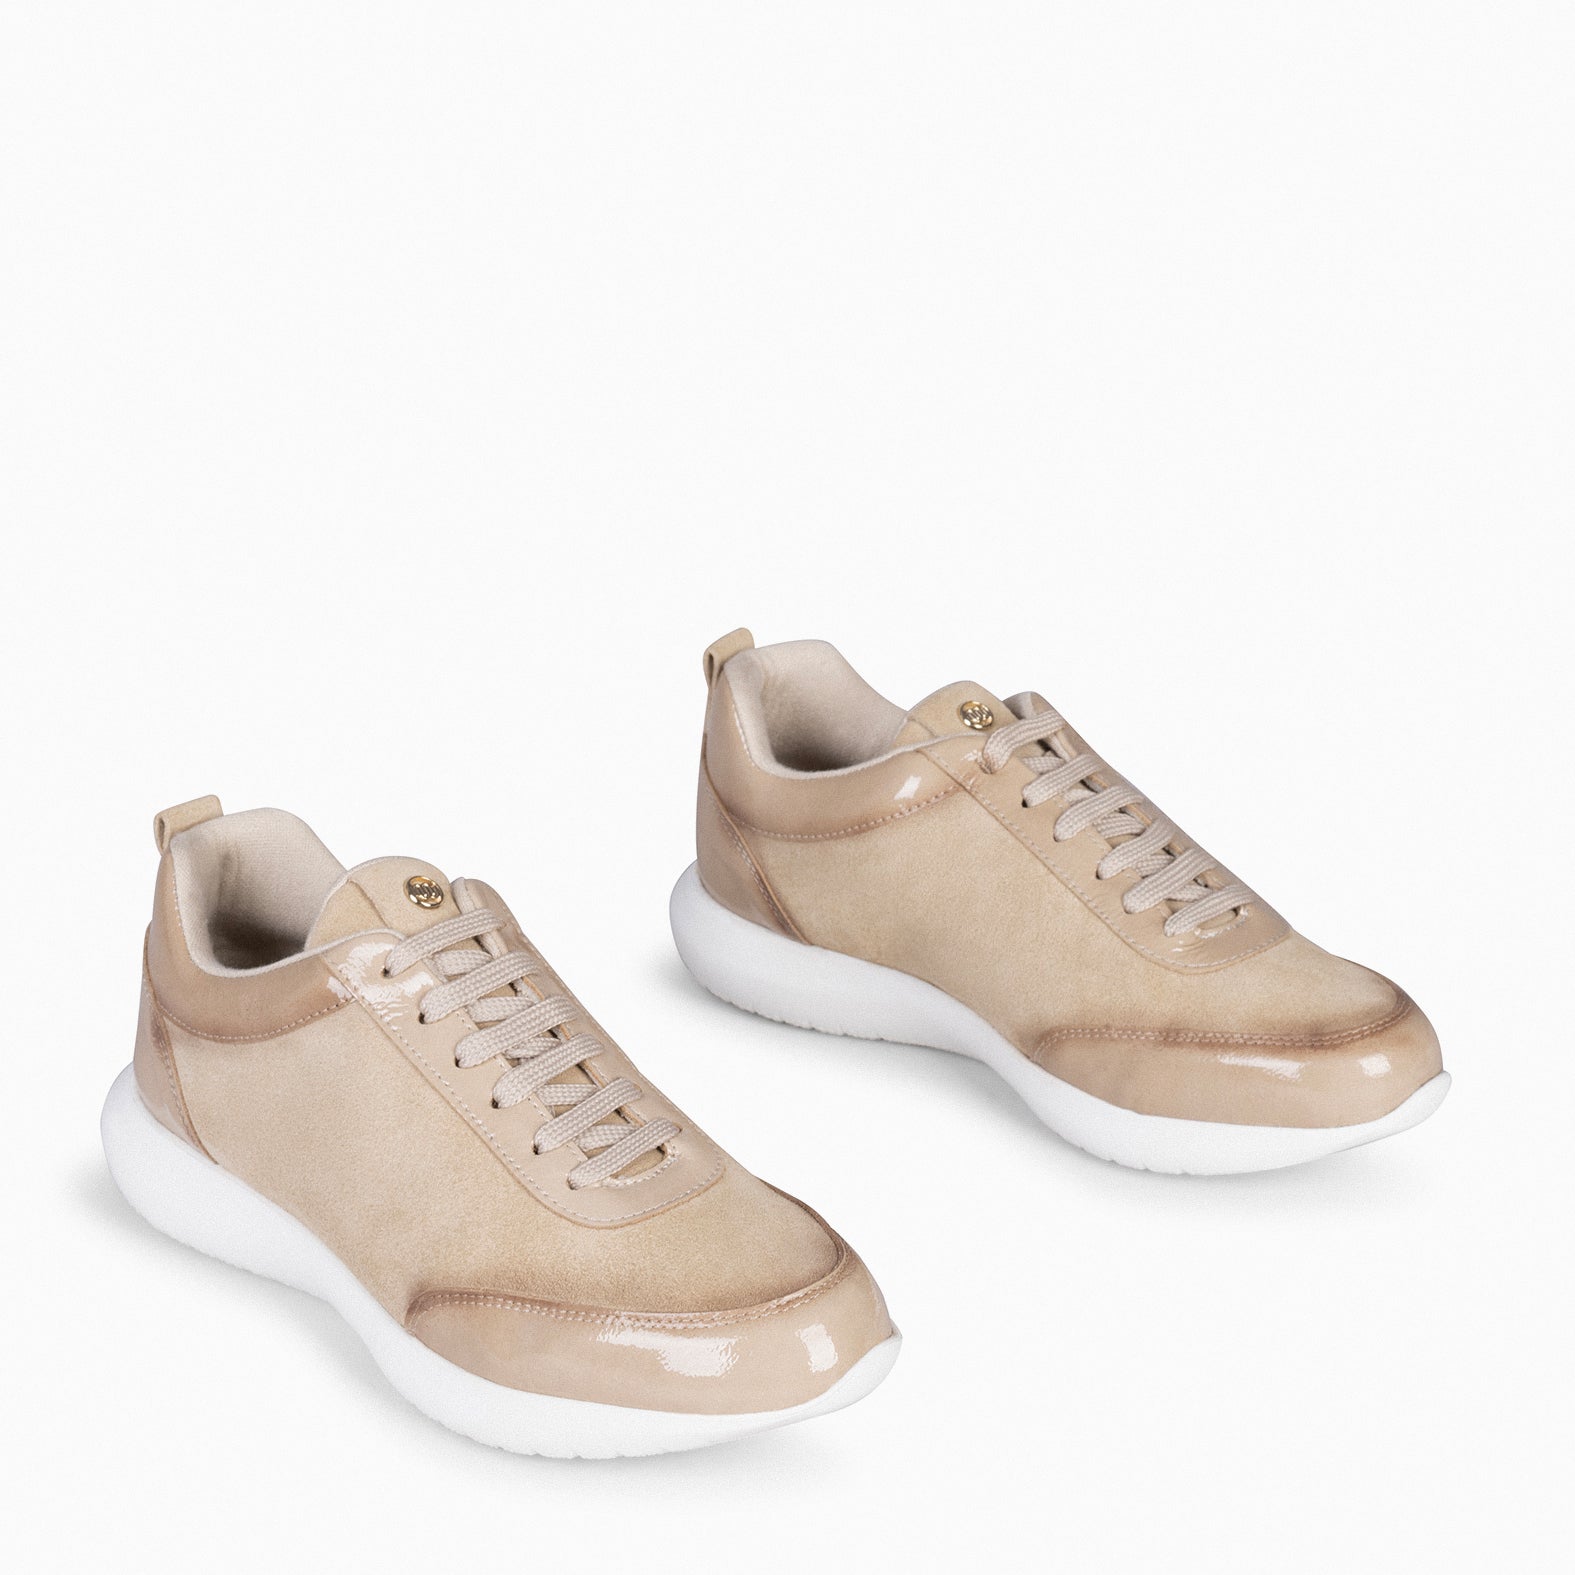 LOIRA - BEIGE Sneakers with Patent Leather